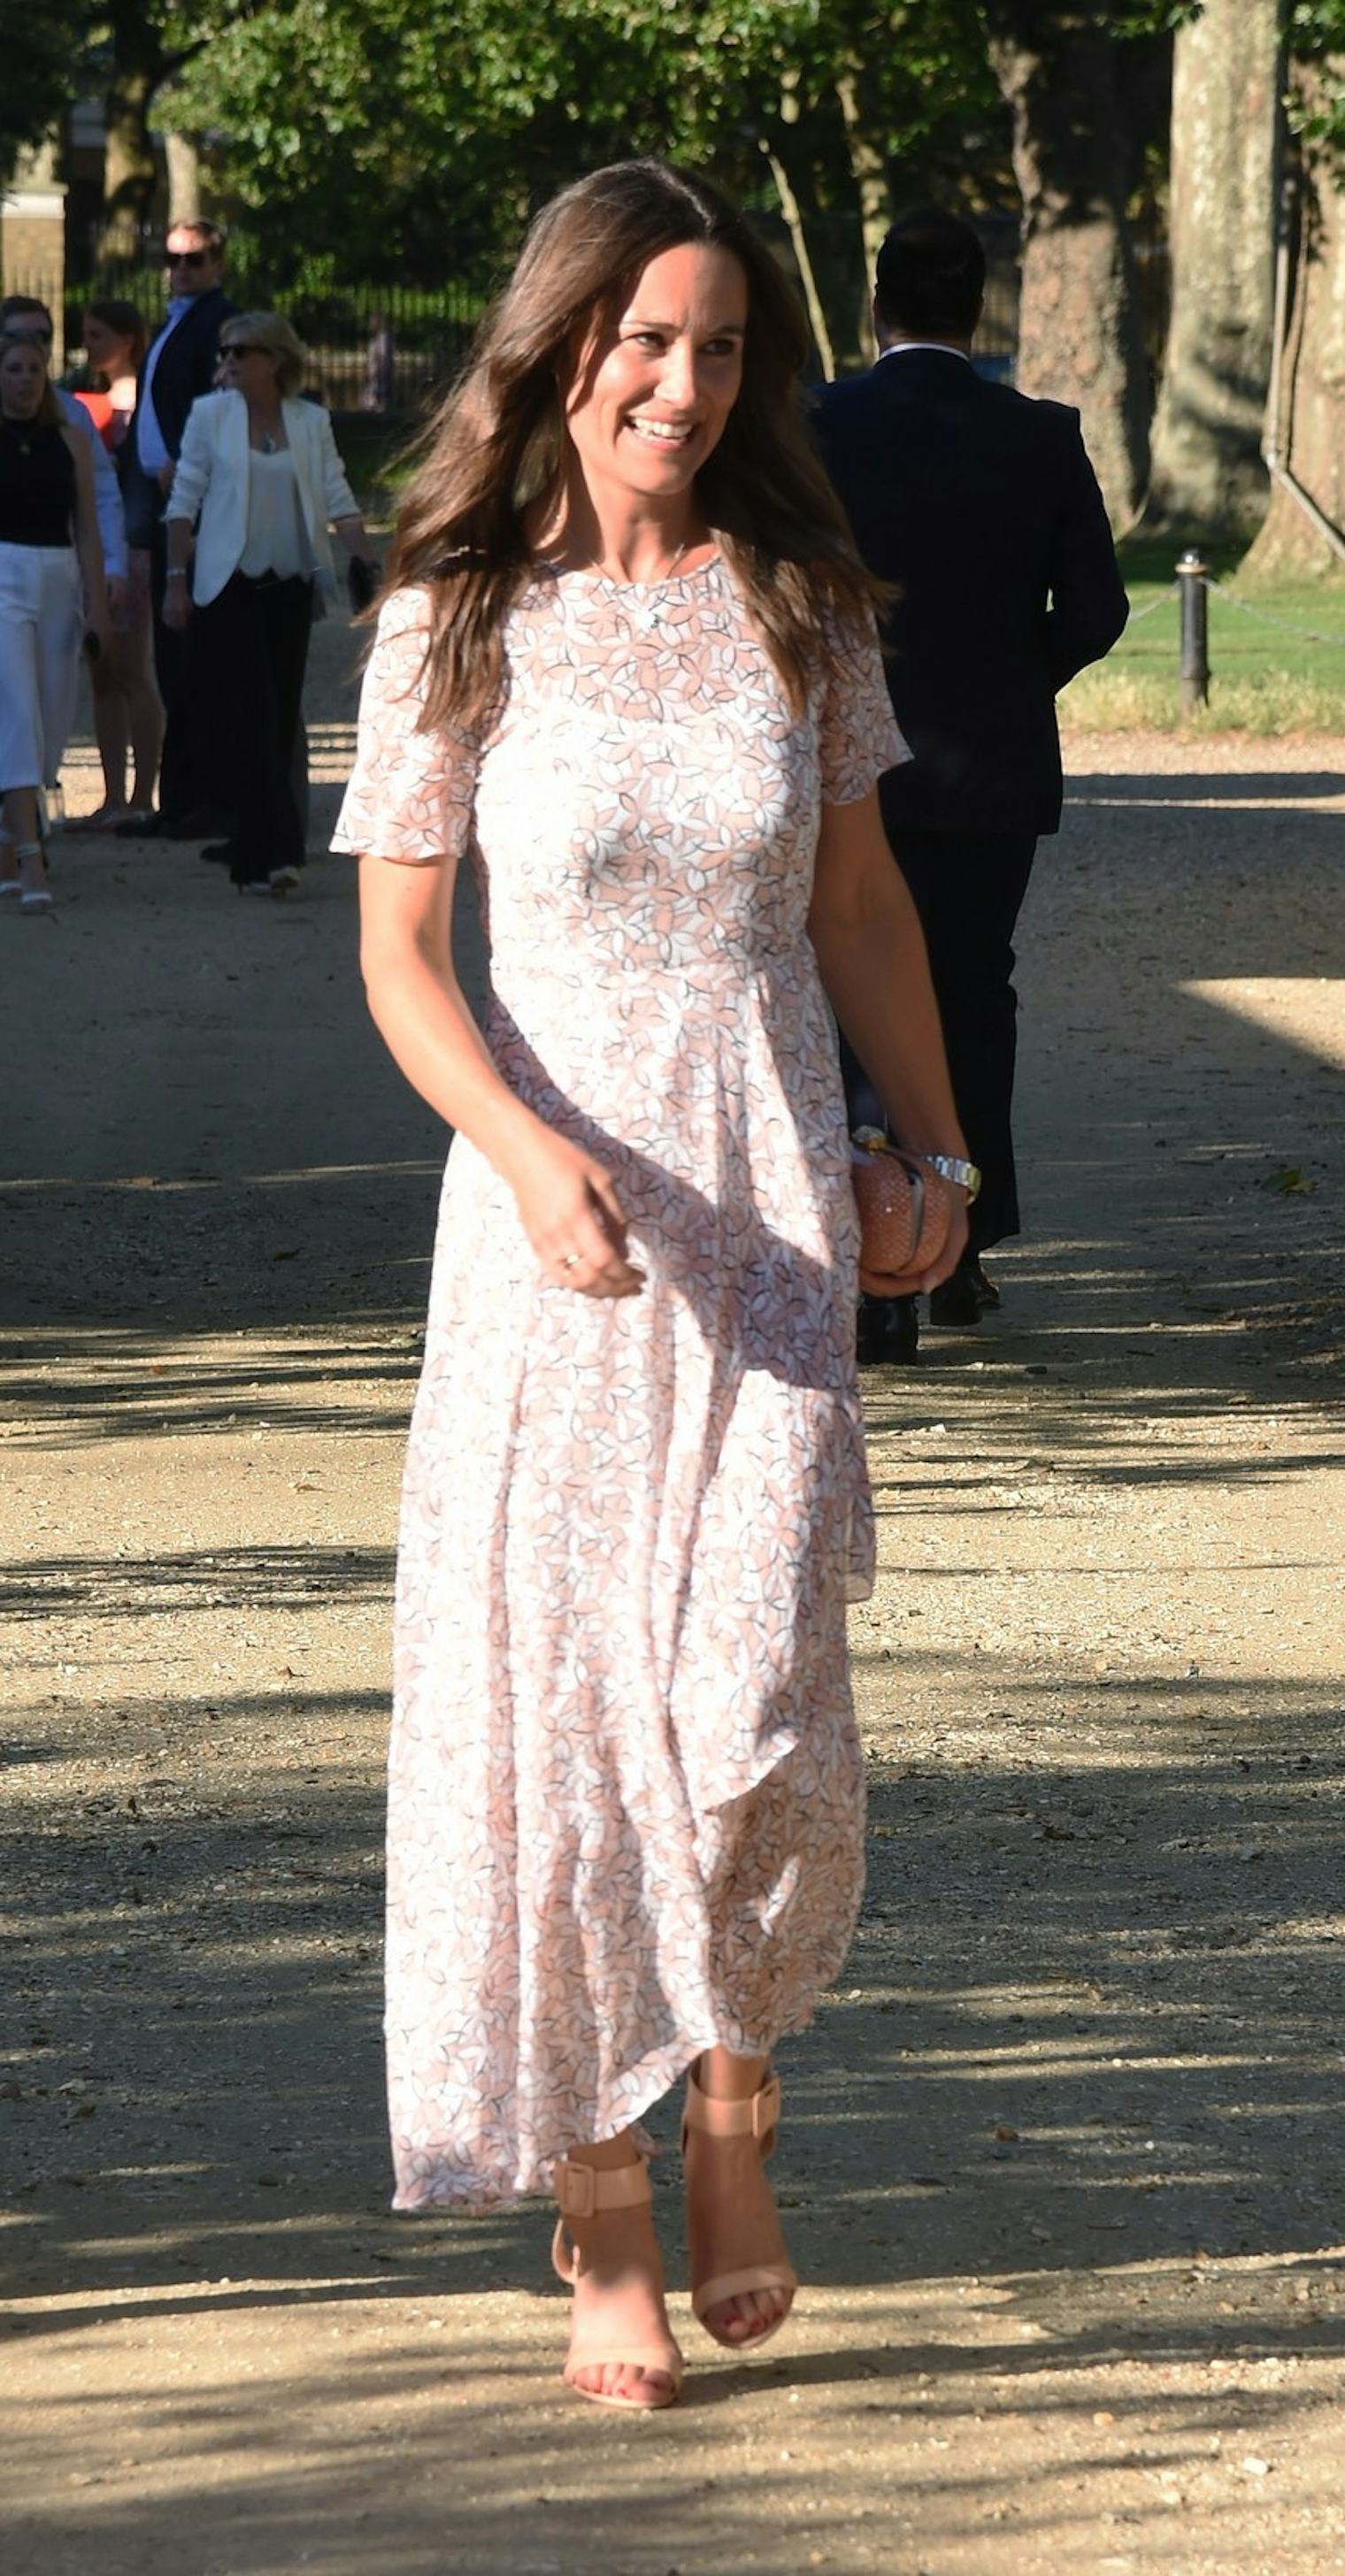 Pippa Middleton’s Best Fashion Looks Over the Years